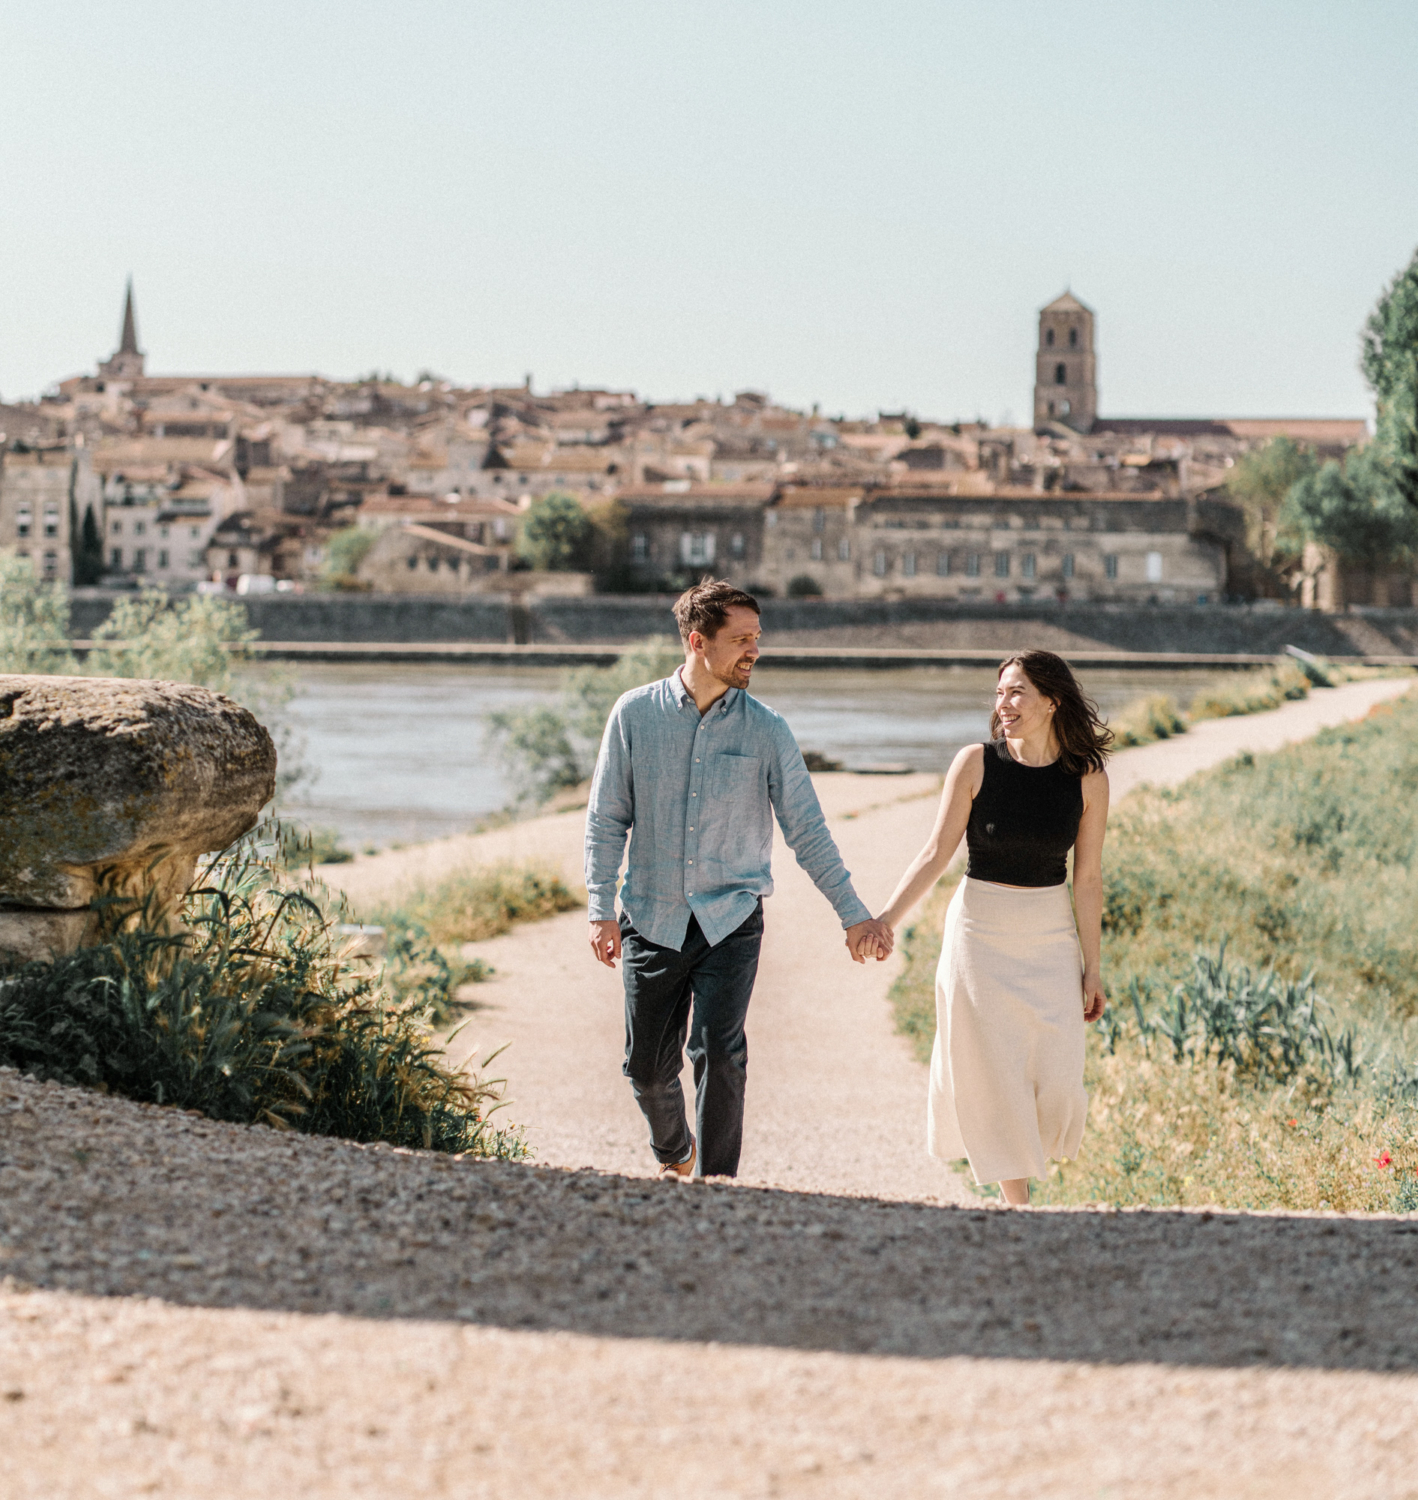 cute couple walk hand in hand with arles in background